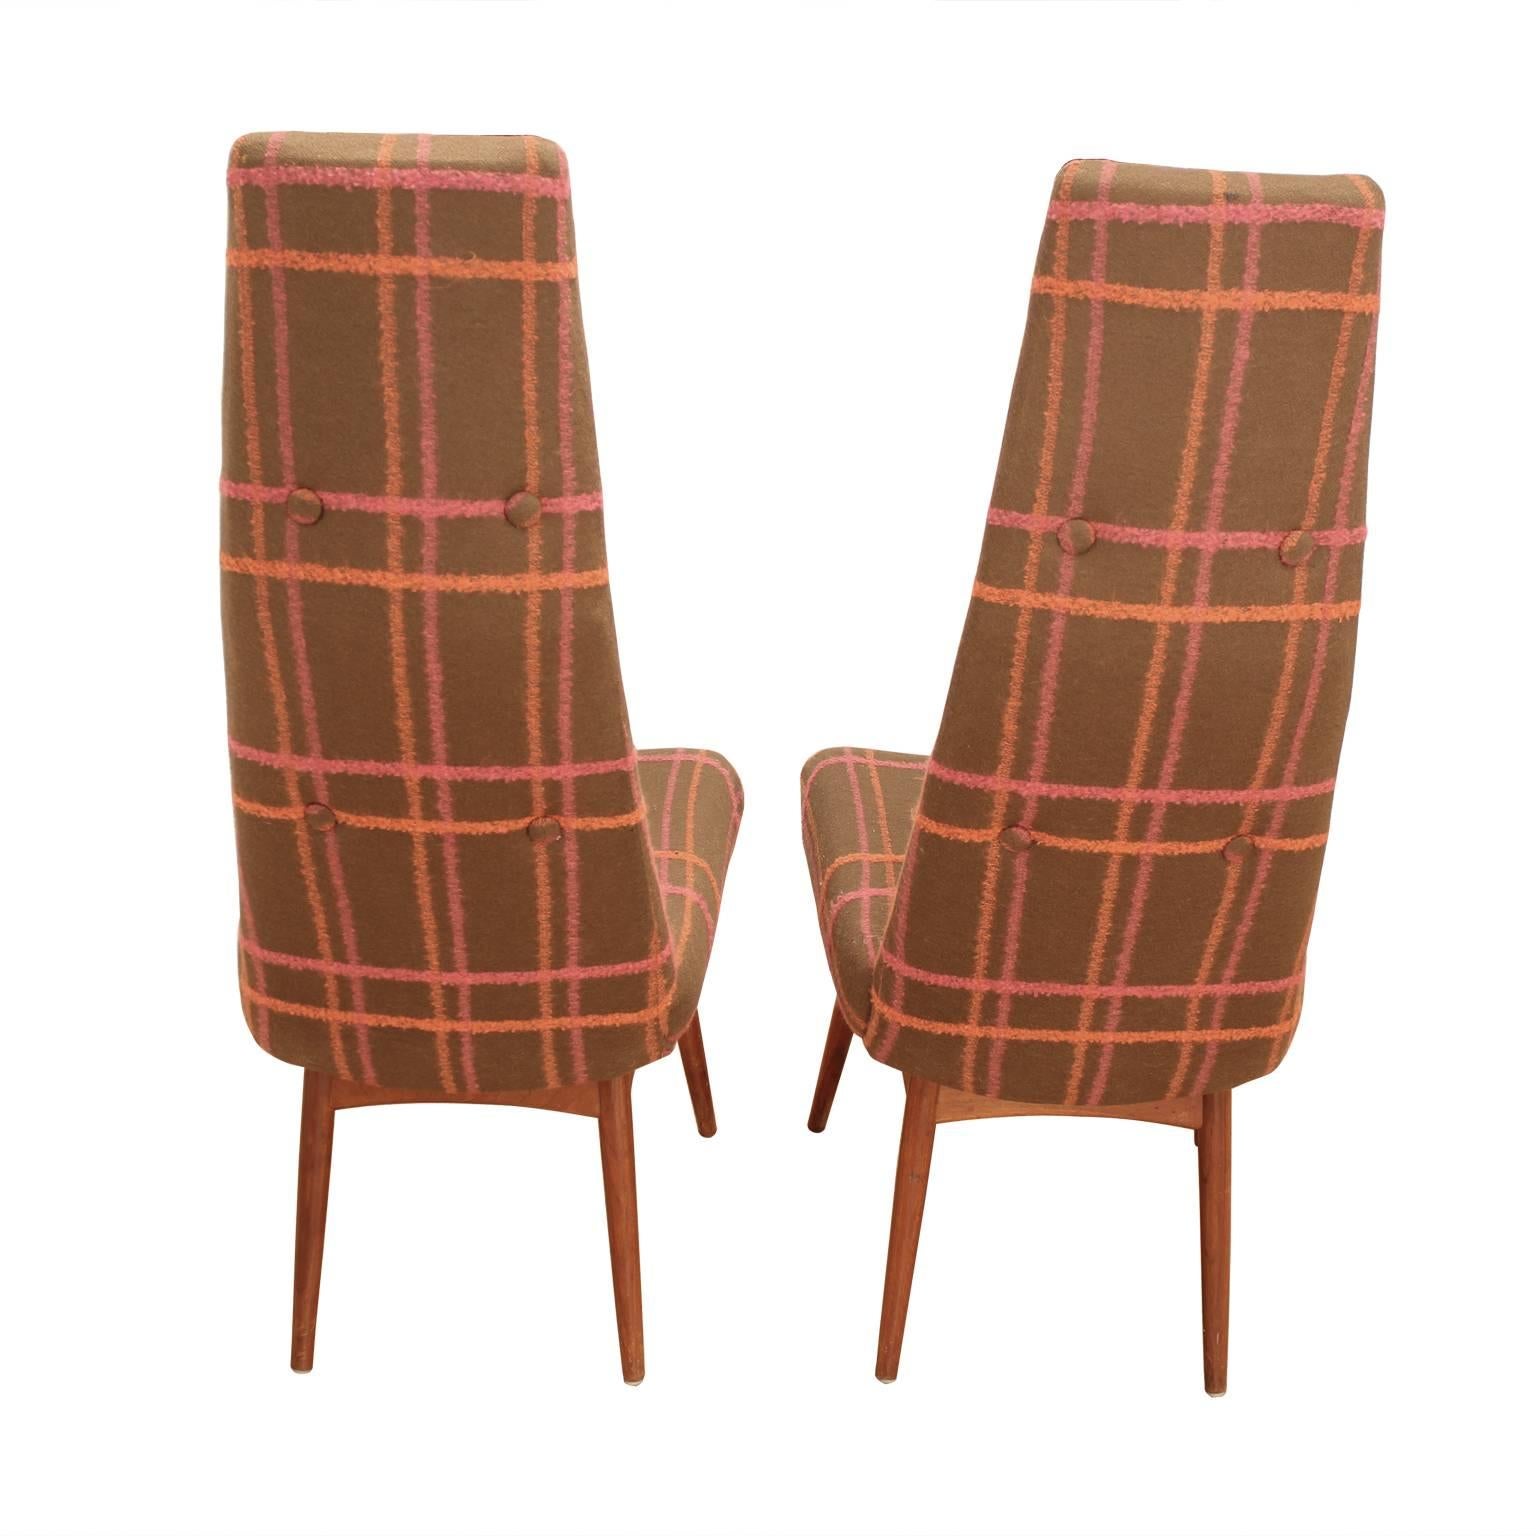 Walnut Adrian Pearsall 1960s High Back Dining Chairs For Sale